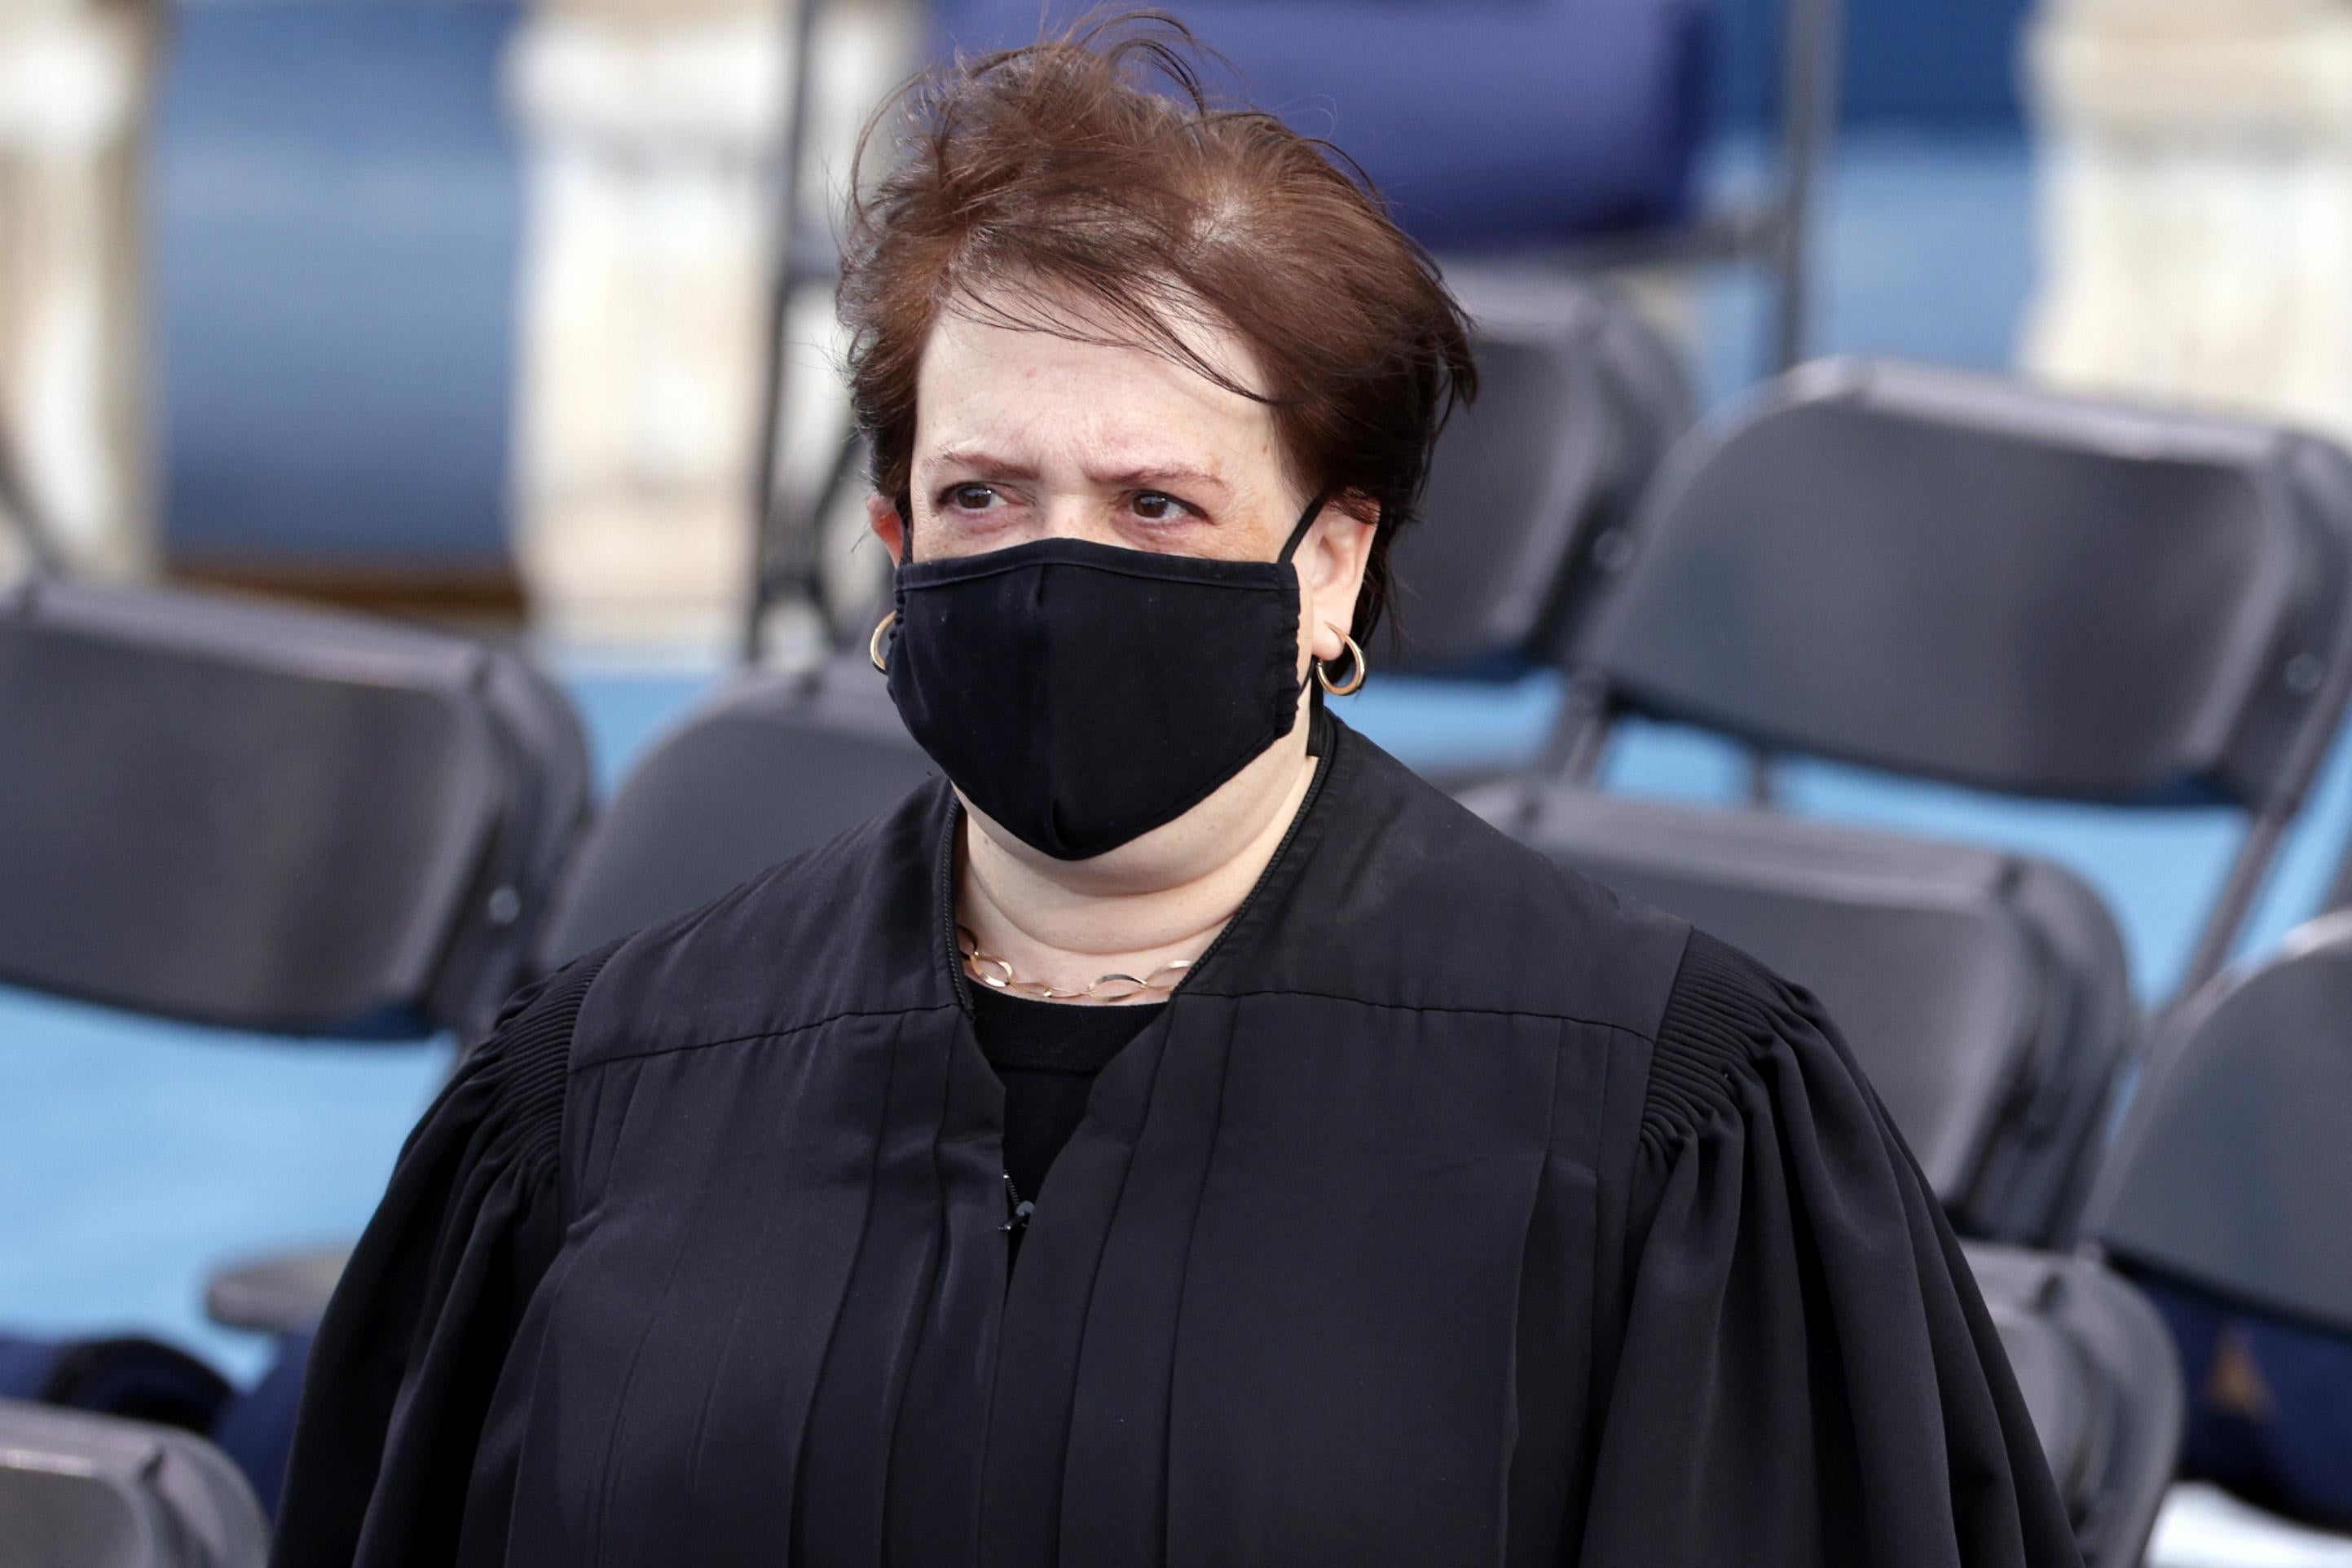 Elena Kagan stands outside wearing a robe and a mask.